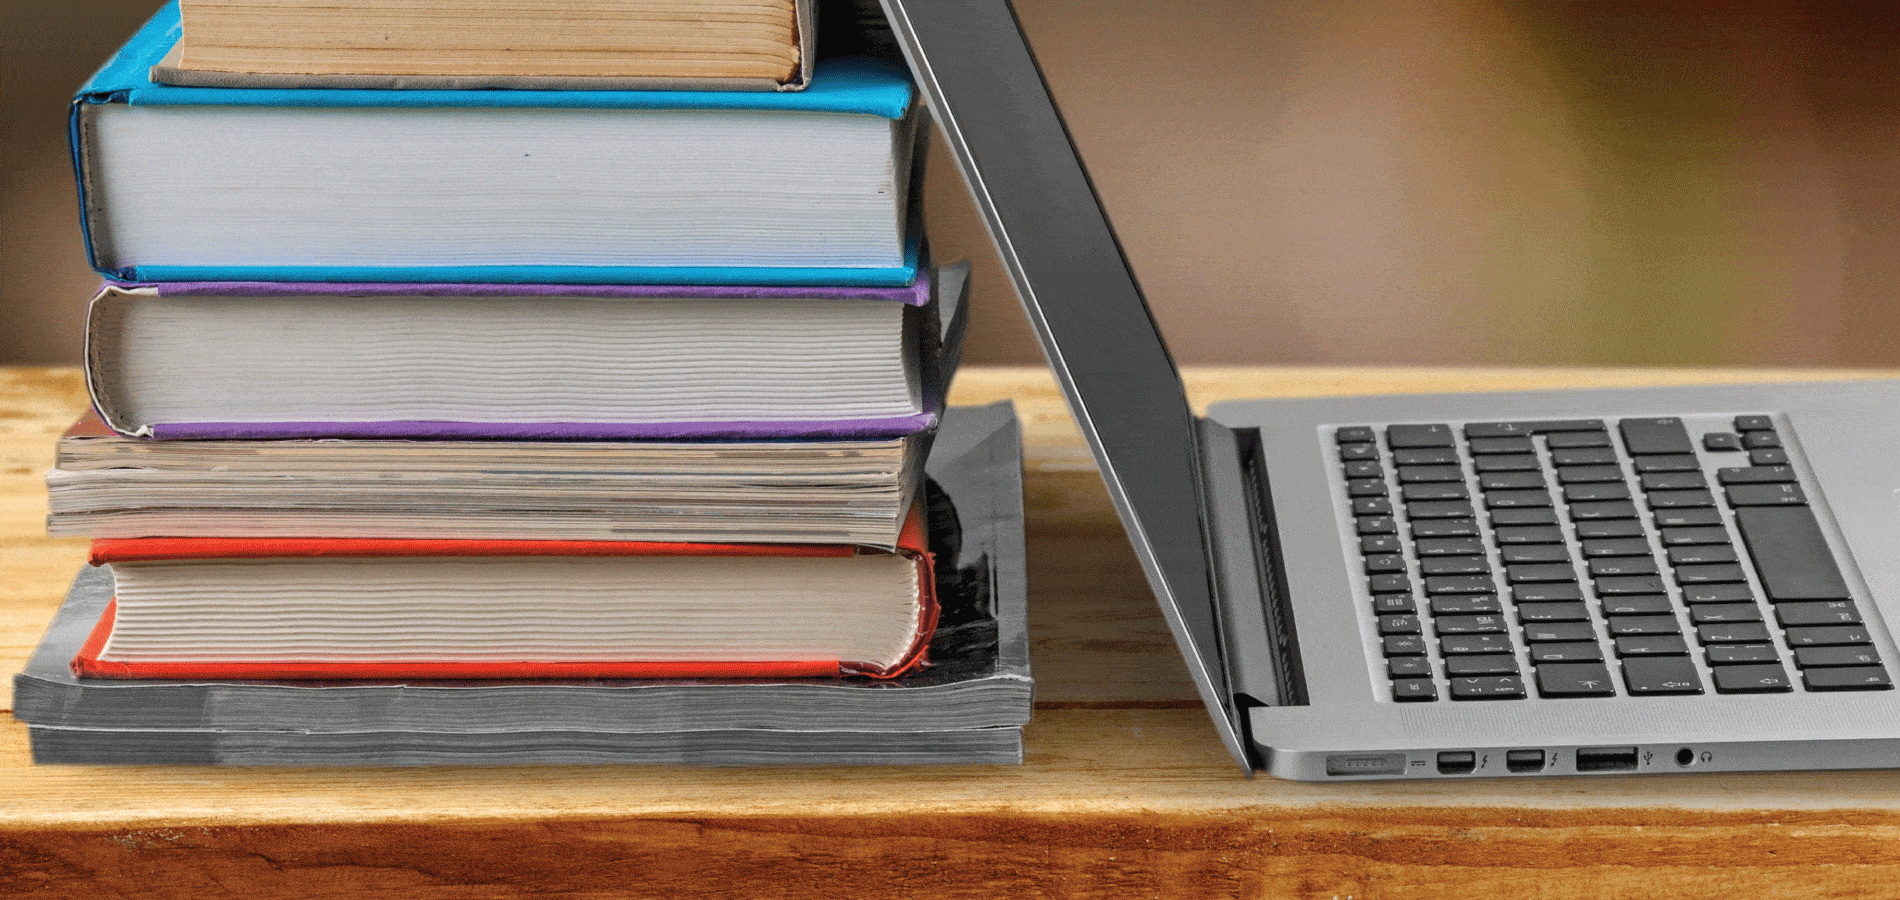 image of laptop and a stack of books